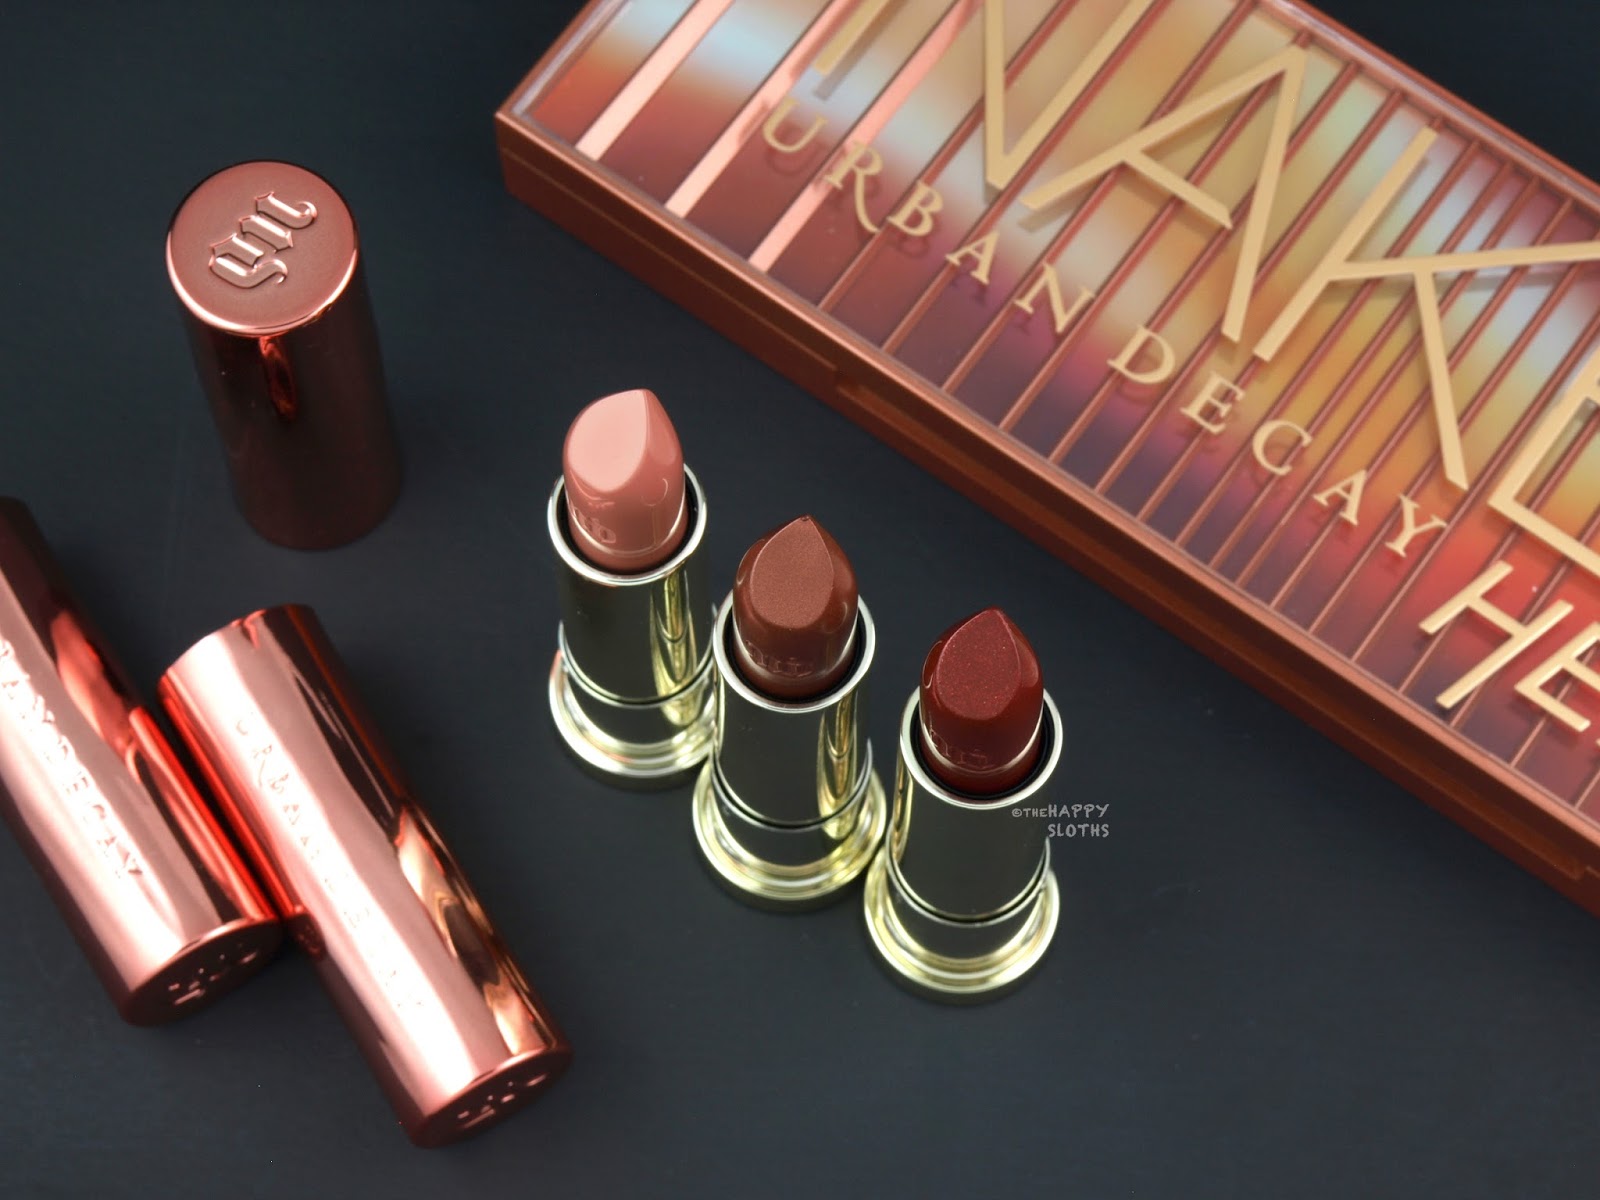 Urban Decay Naked Heat Vice Lipsticks: Review and Swatches